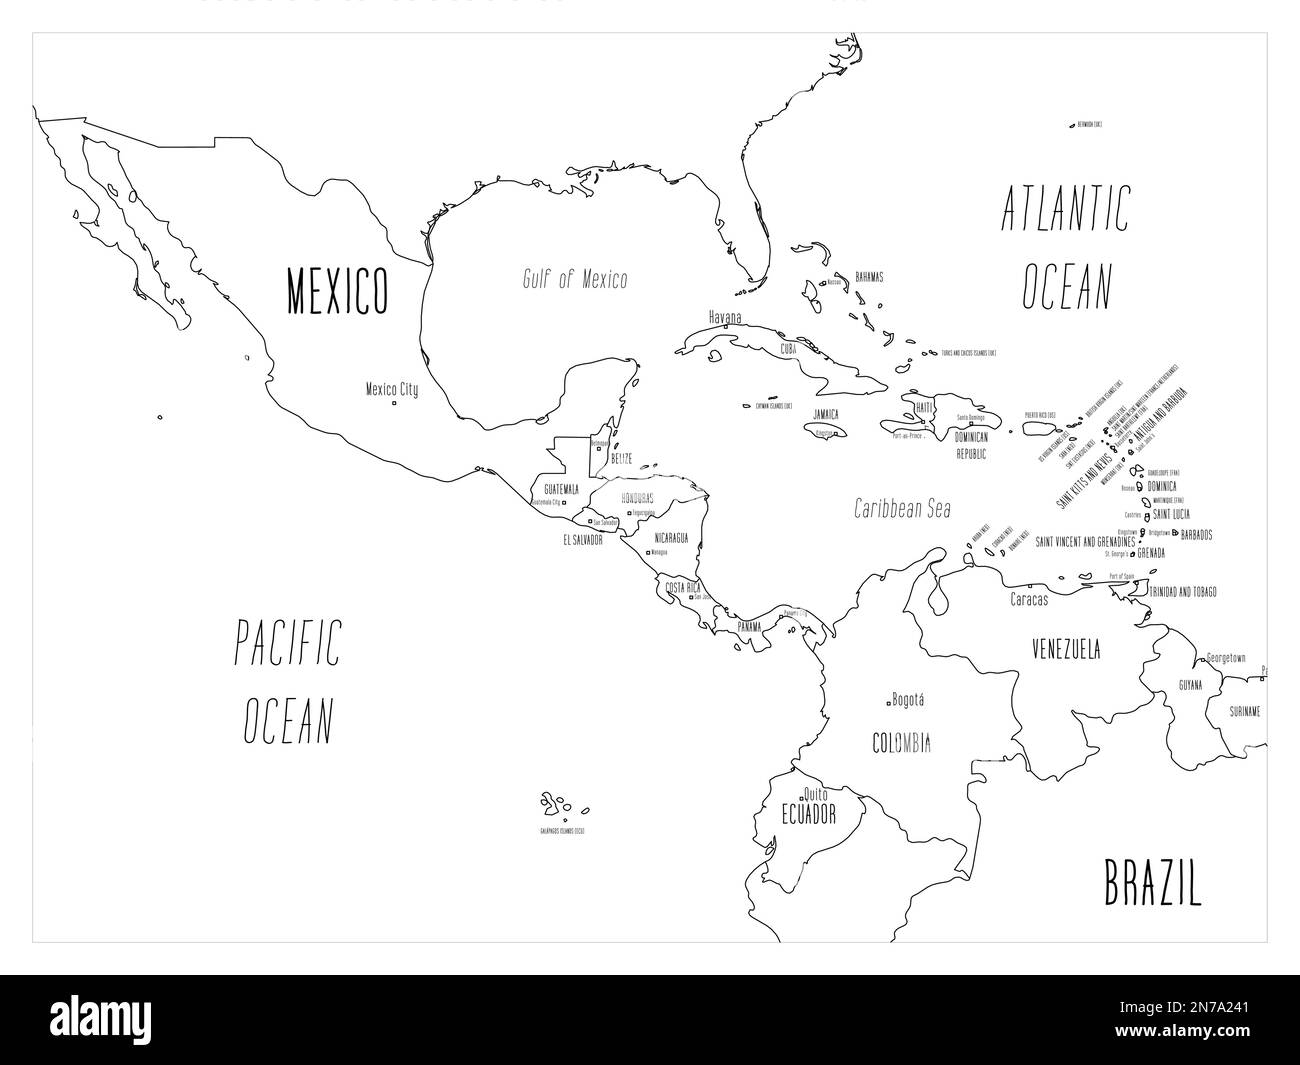 Political map of Central America and Caribbean. Black outline hand-drawn cartoon style illustrated map with bathymetry. Handwritten labels of country, capital city, sea and ocean names. Simple flat vector map. Stock Vector